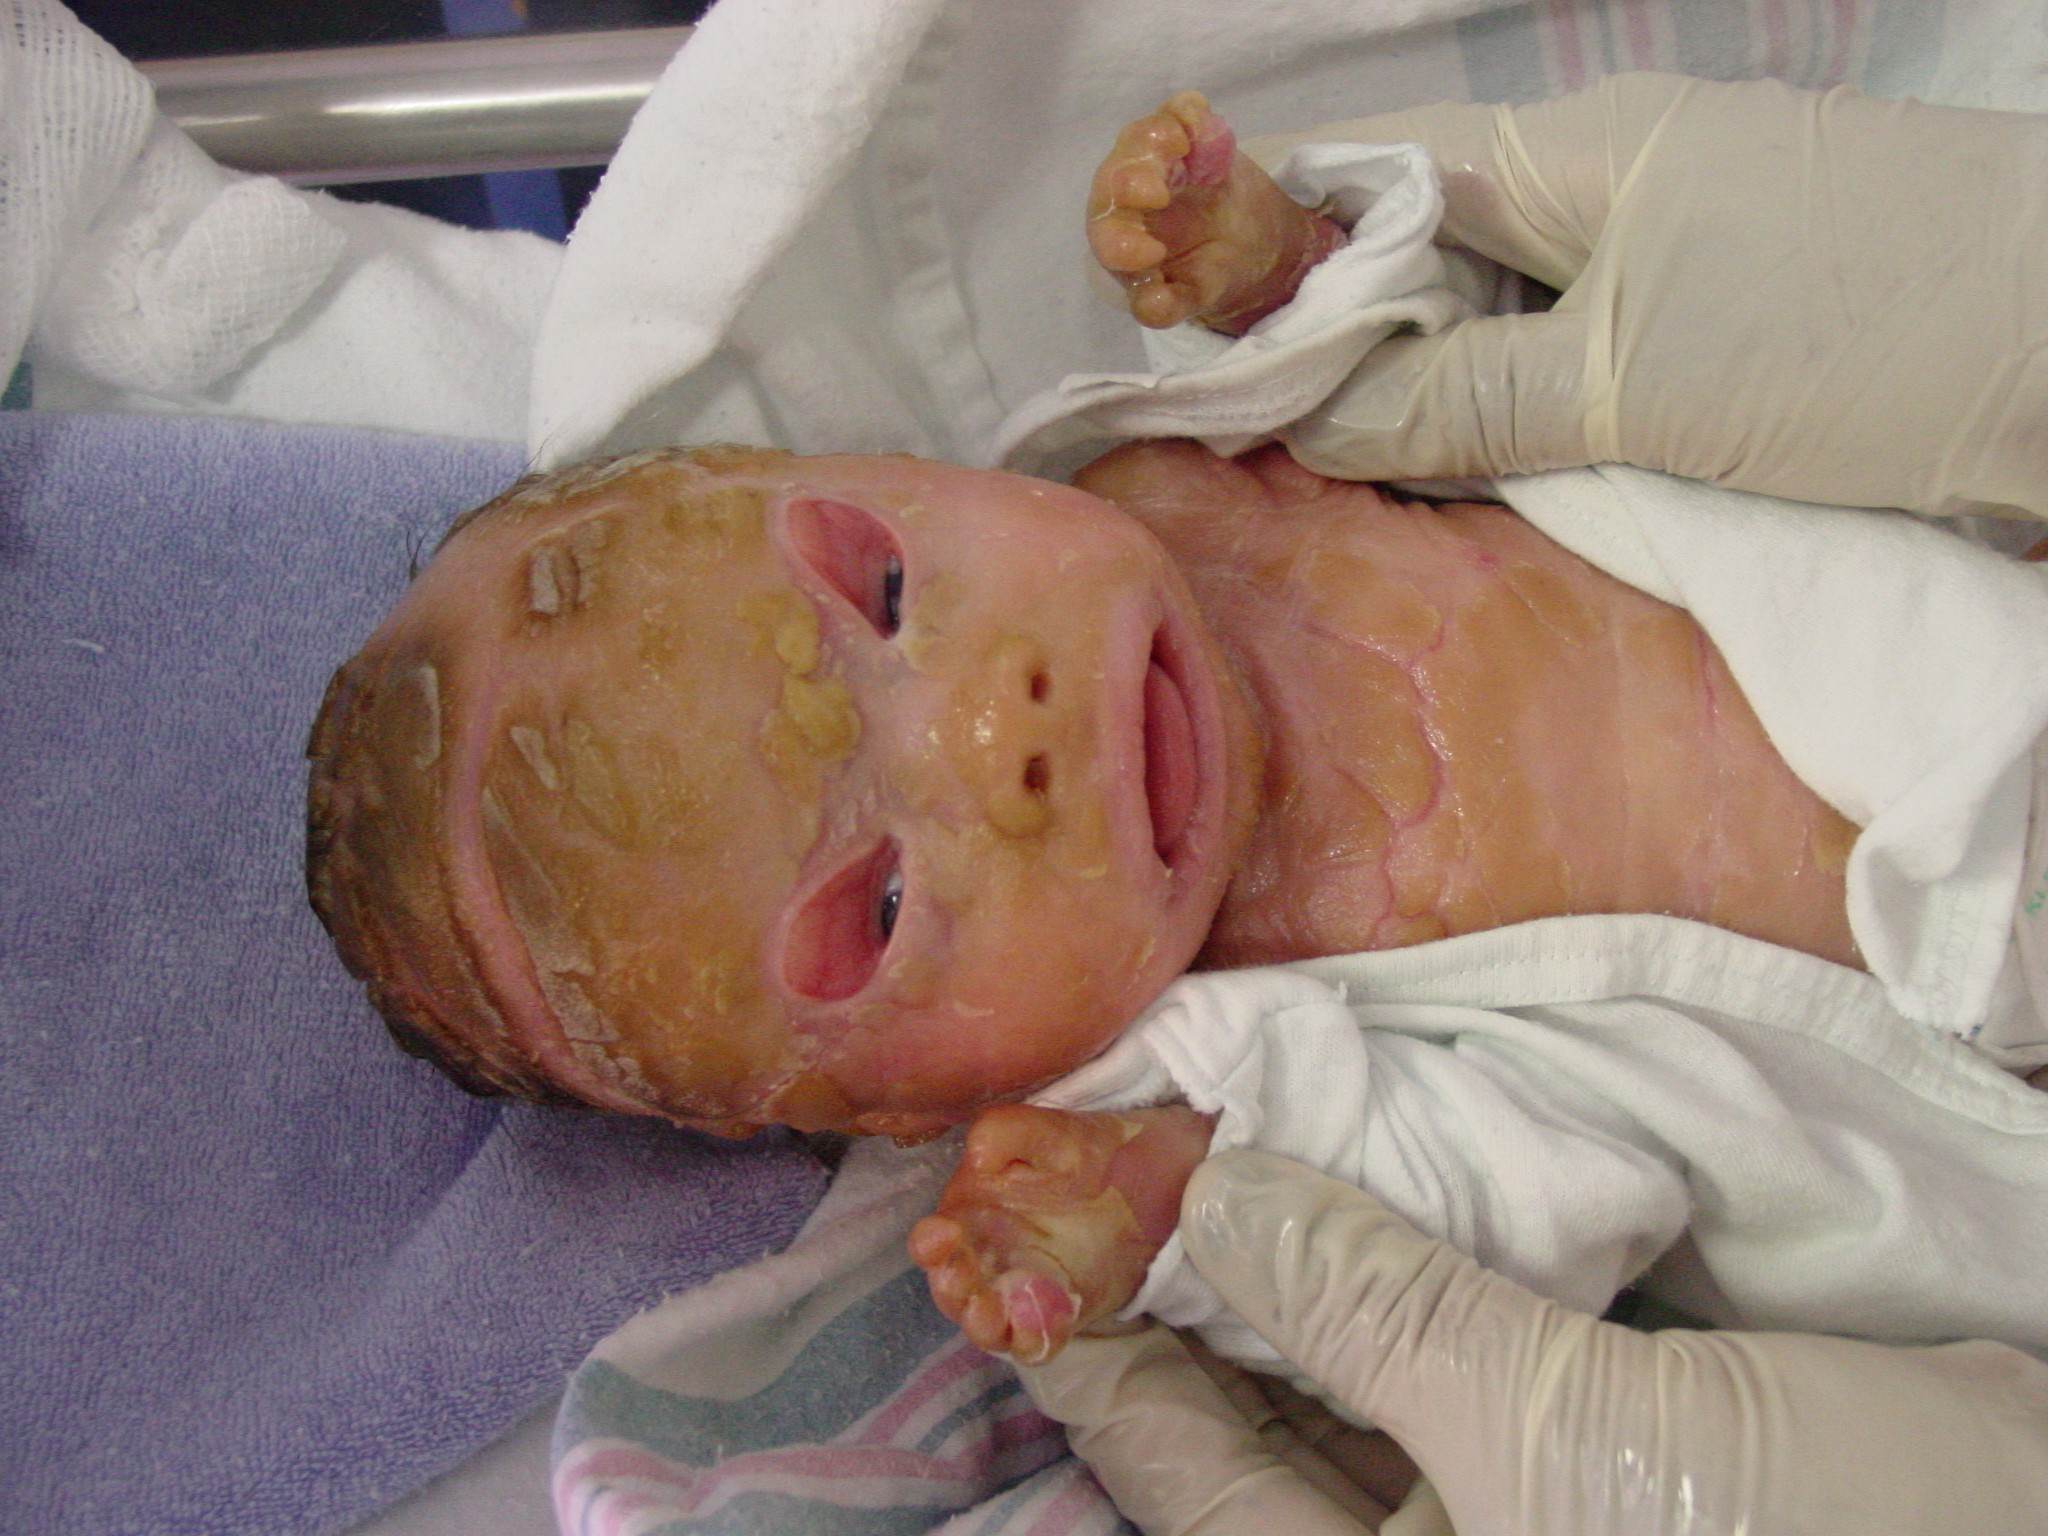 covered with plates of thick skin that crack and split apart. The thick skin plates can pull at and distort the infant's facial features.